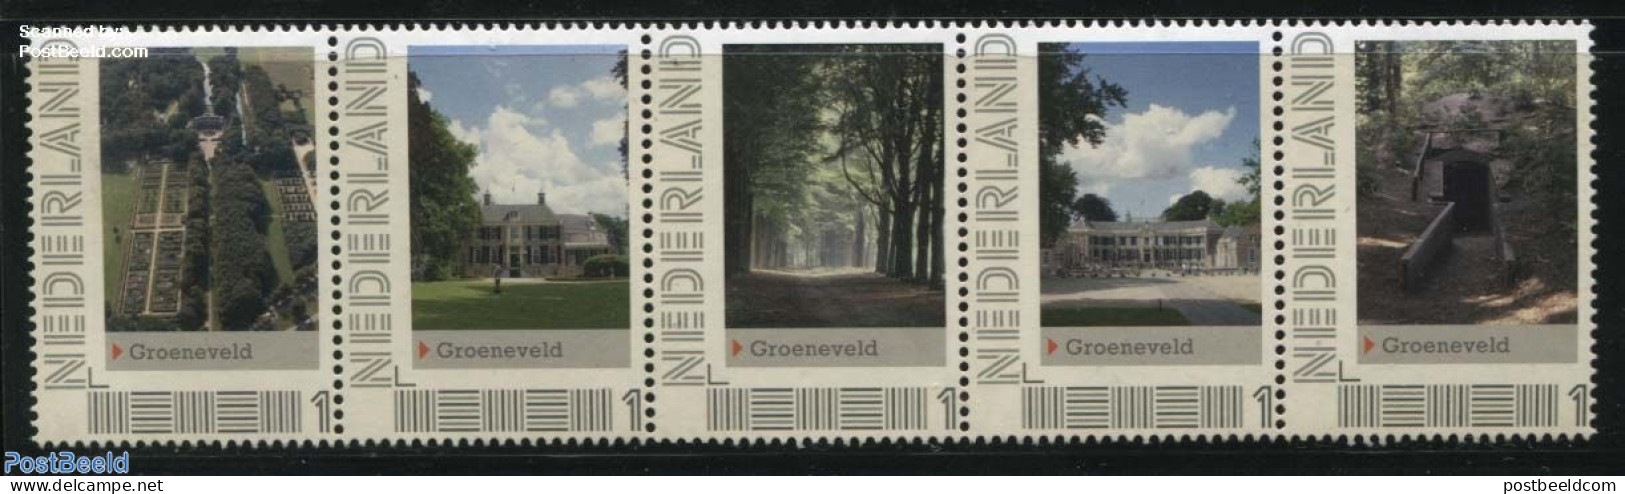 Netherlands - Personal Stamps TNT/PNL 2012 Groeneveld 5V [::::], Mint NH, Nature - Trees & Forests - Castles & Fortifi.. - Rotary, Club Leones